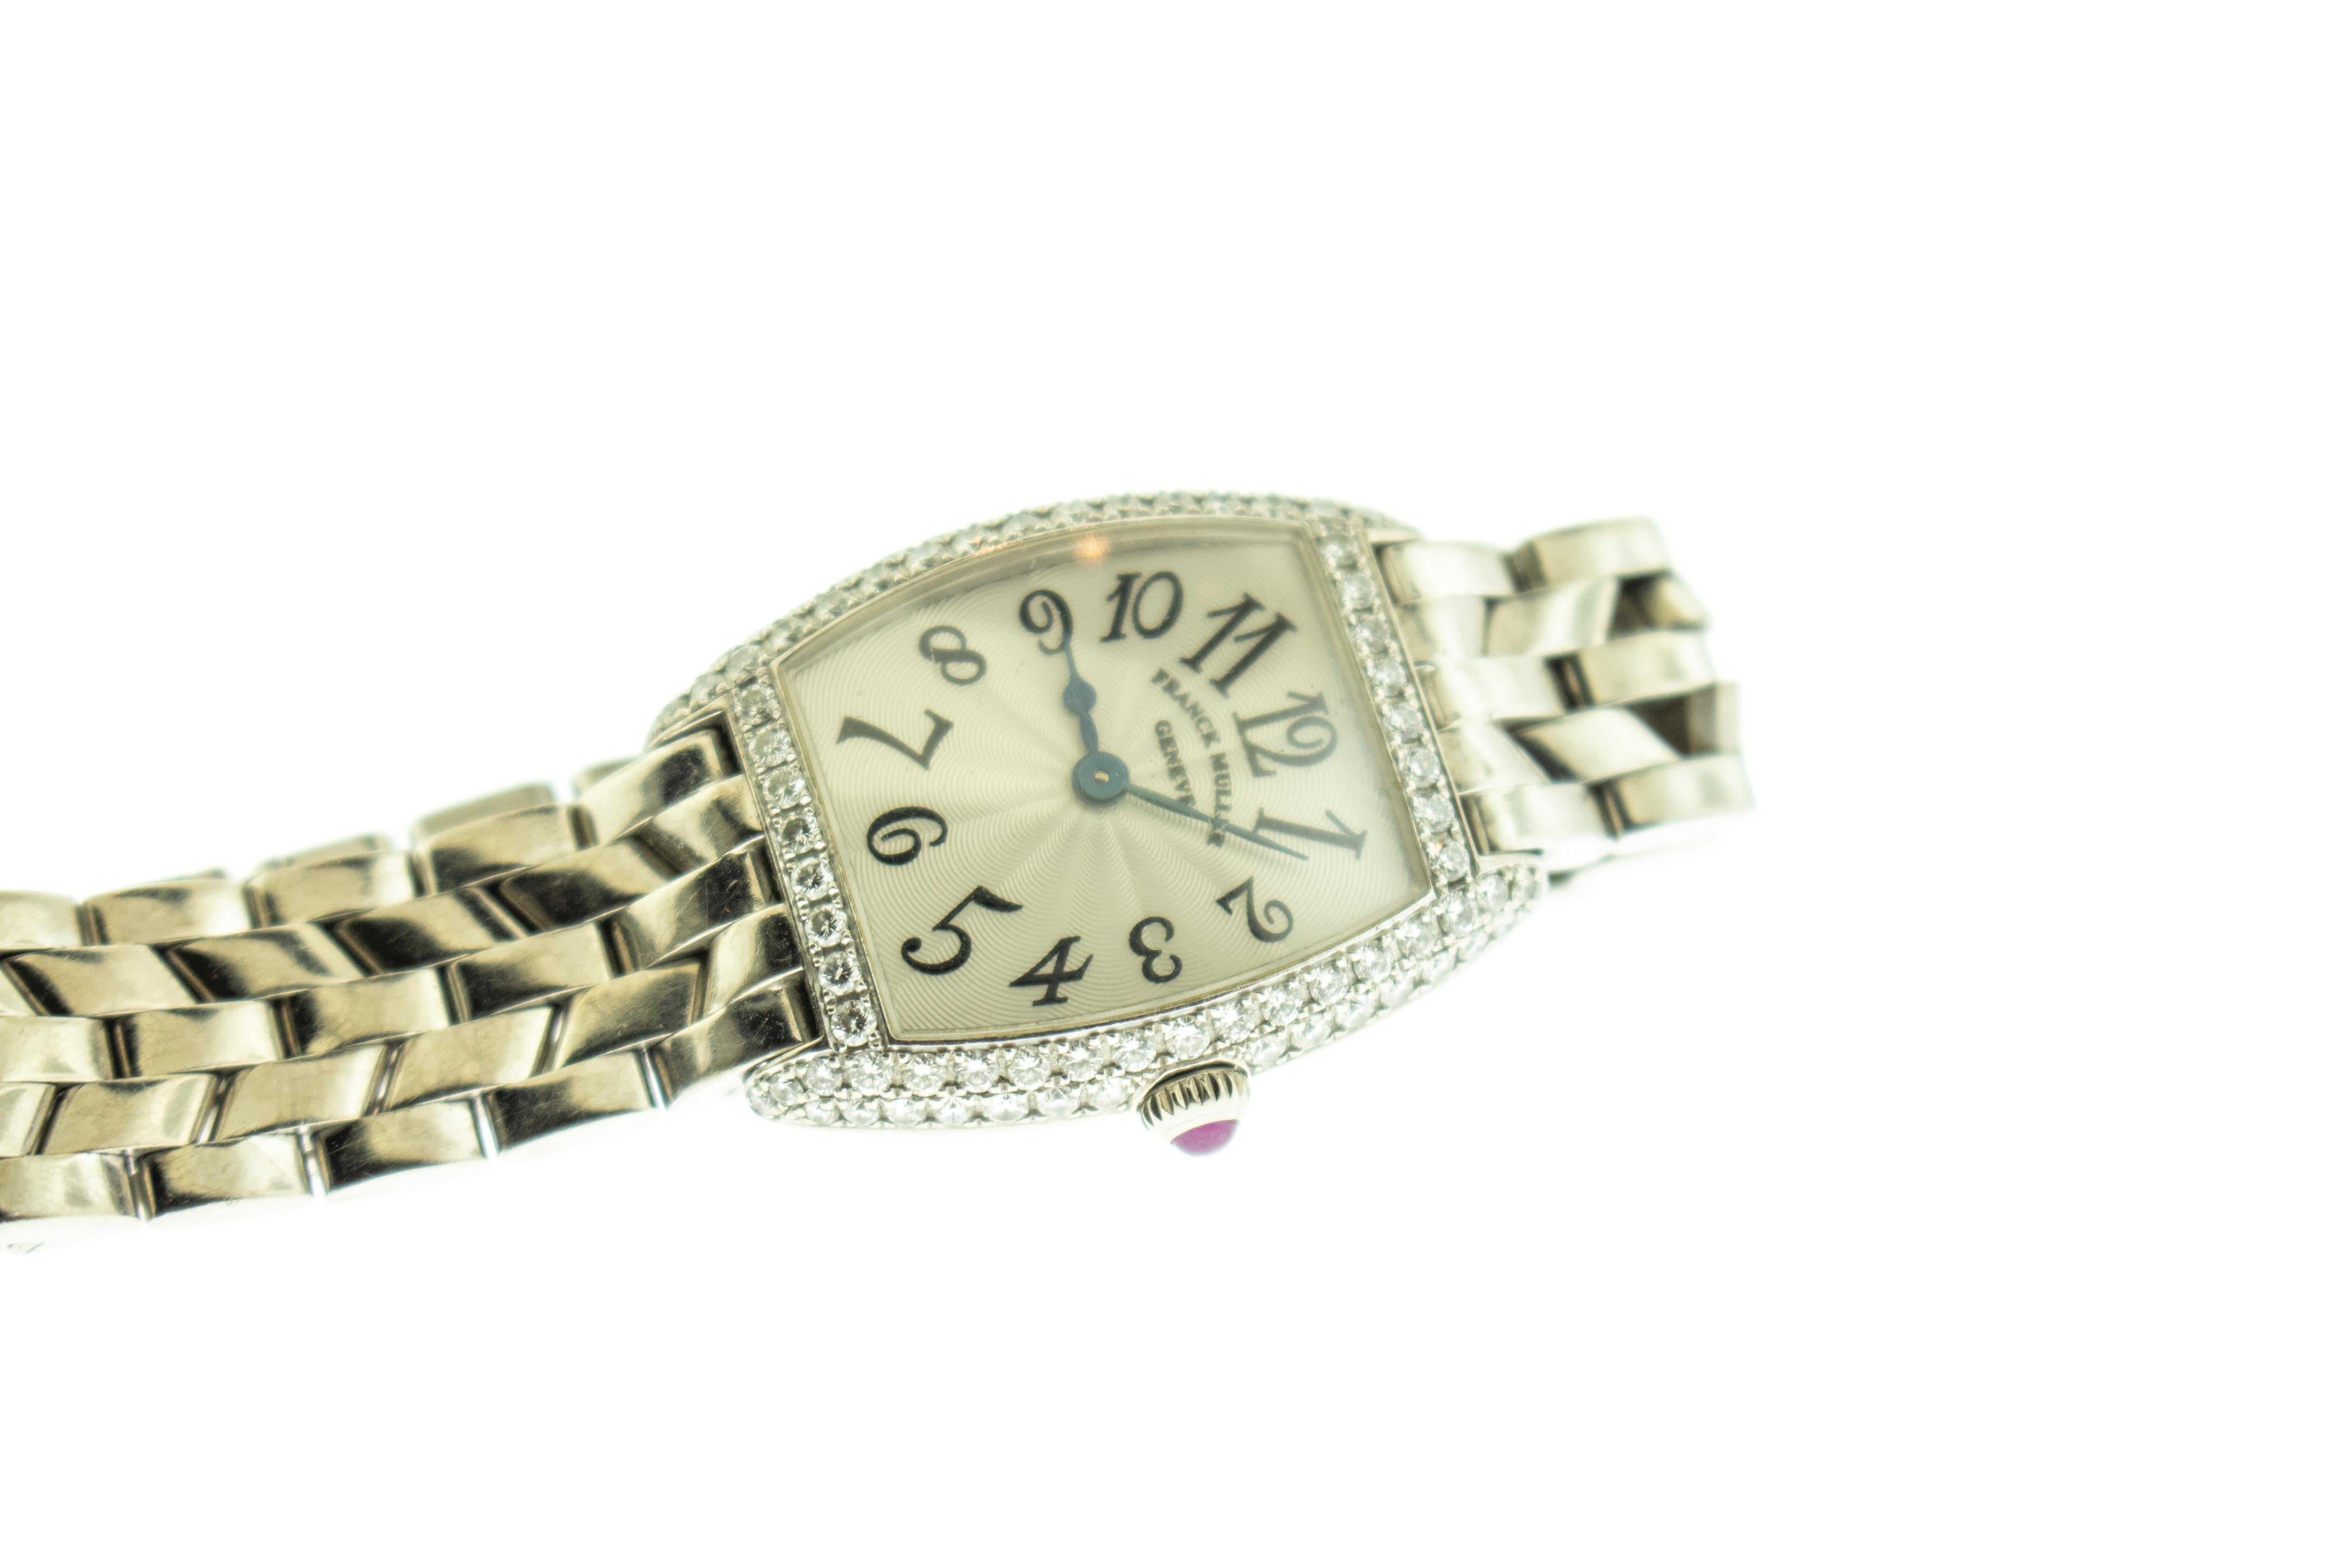 Limited Edition Diamond Case Ladies Franck Muller Watch. Quartz movement Franck Muller watch is number 117 in a limited series. Case 22mm x 25mm, Total weight 85.14 grams 